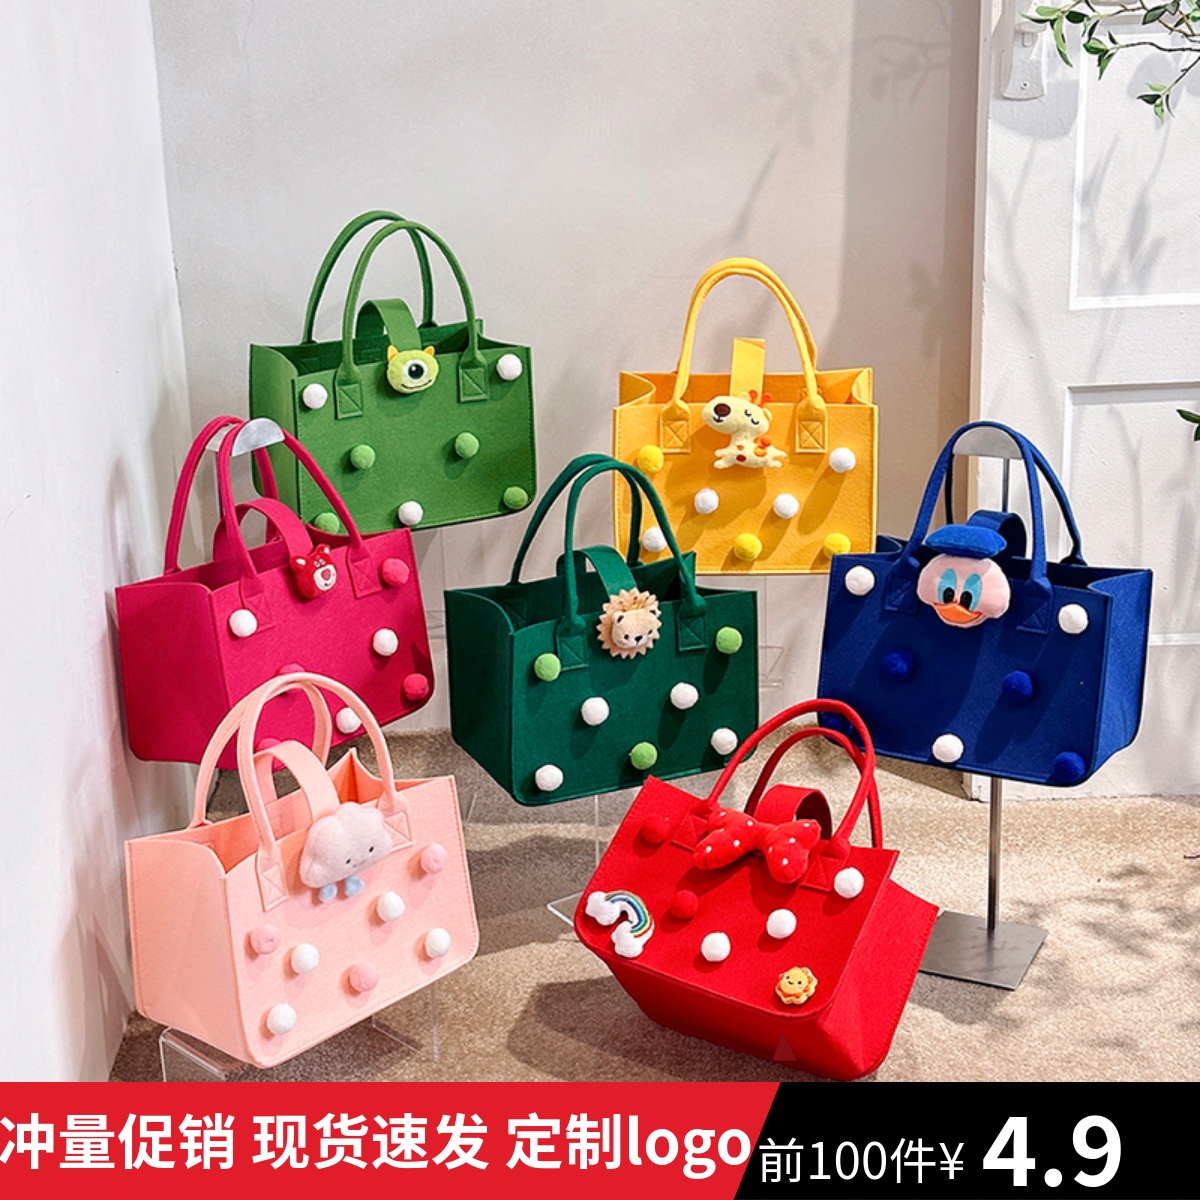 New Cartoon Felt Bag Large Capacity Hand Shopping Bag Thickening Mommy Bag Mesh Red Hundred Day Banquet Gift Companion Gift-Taobao